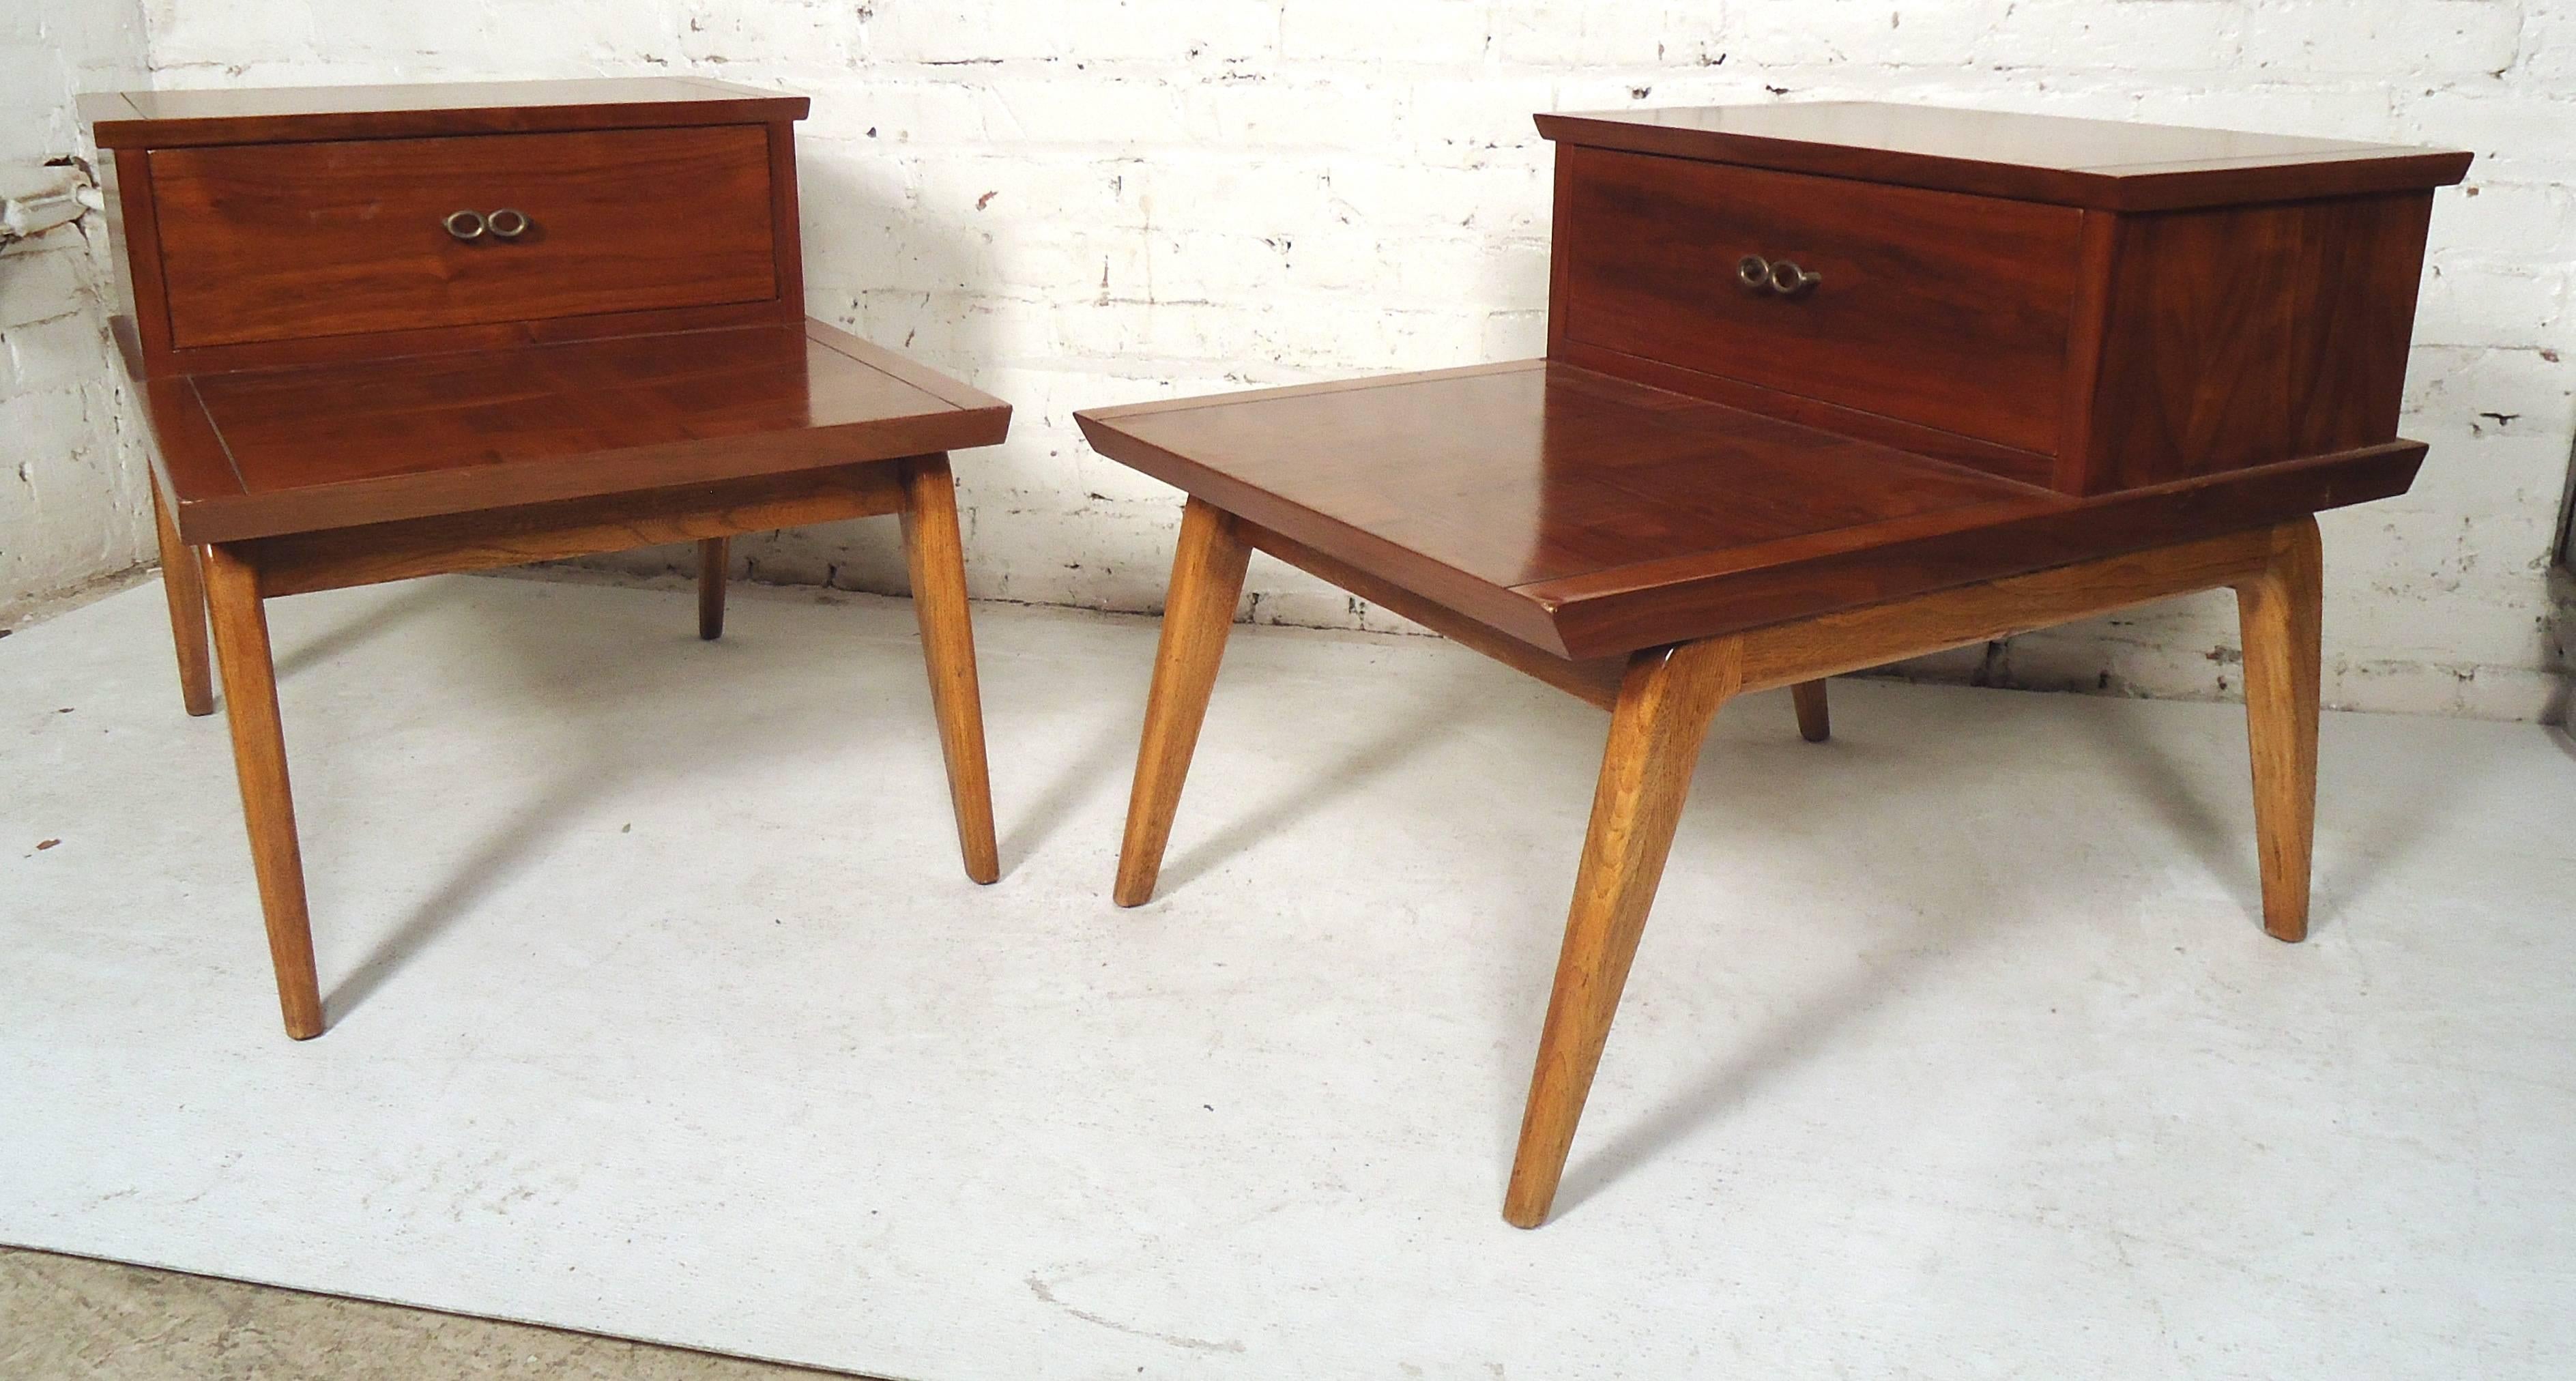 Elegant Mid-Century Modern end tables by Lane feature a unique design top, a drawer each with metallic pulls, and sturdy oak legs.

Please confirm item location (NY or NJ).
 